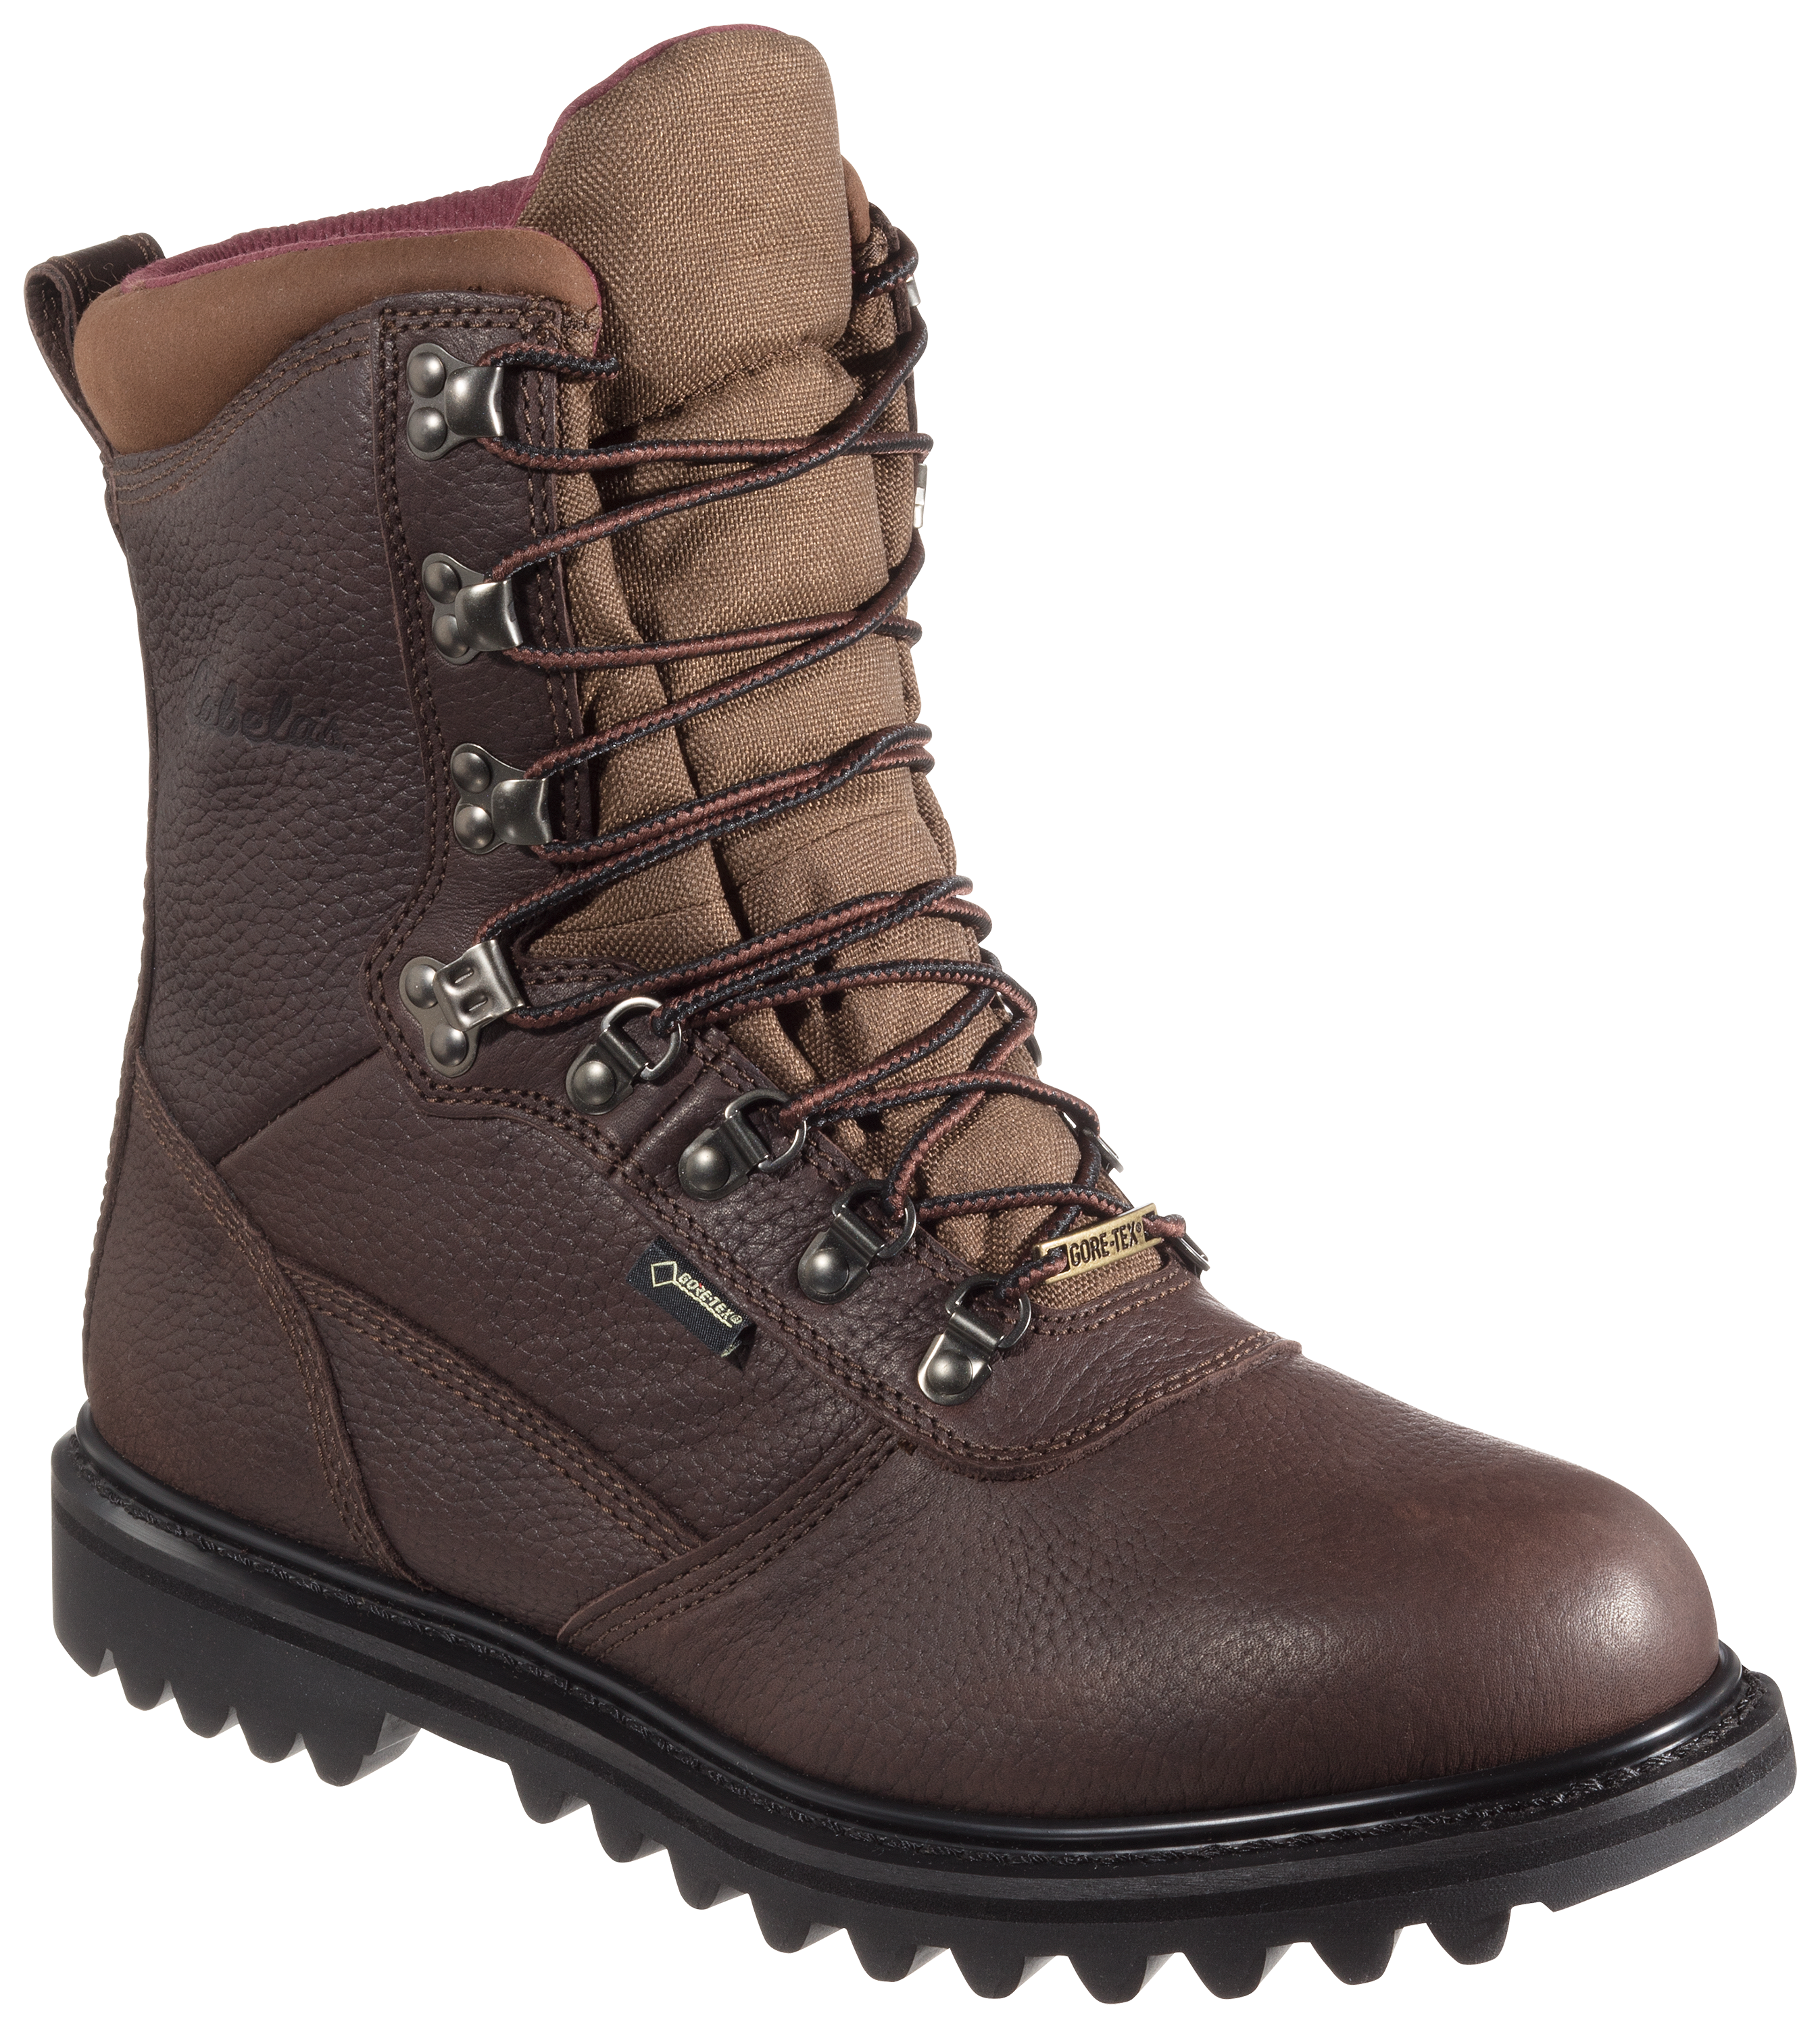 Cabela's Iron Ridge GORE-TEX Insulated Hunting Boots for Men - Brown - 11W